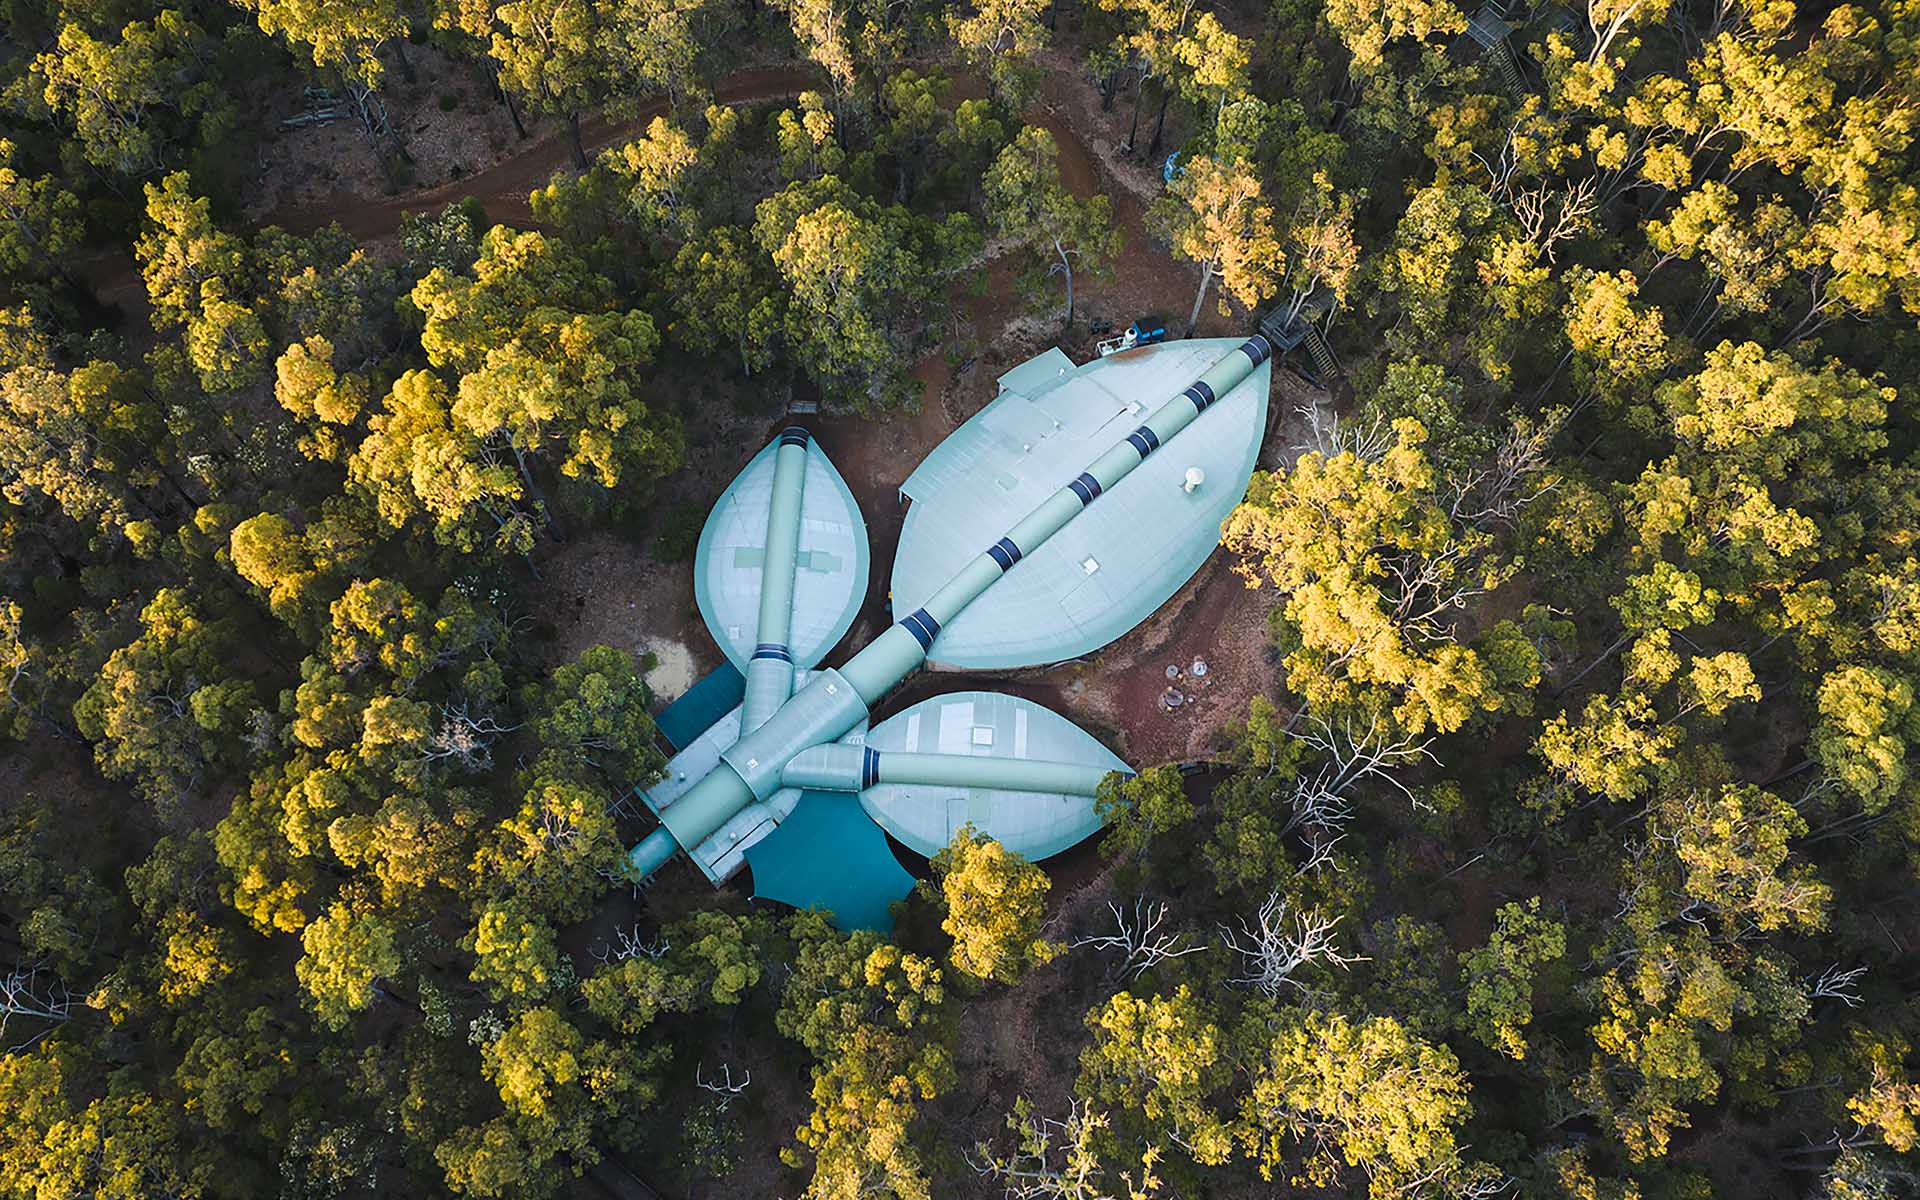 Aeiral photo of the leaf-shaped Forest Discovery Centre in Dwellingup, Western Australia